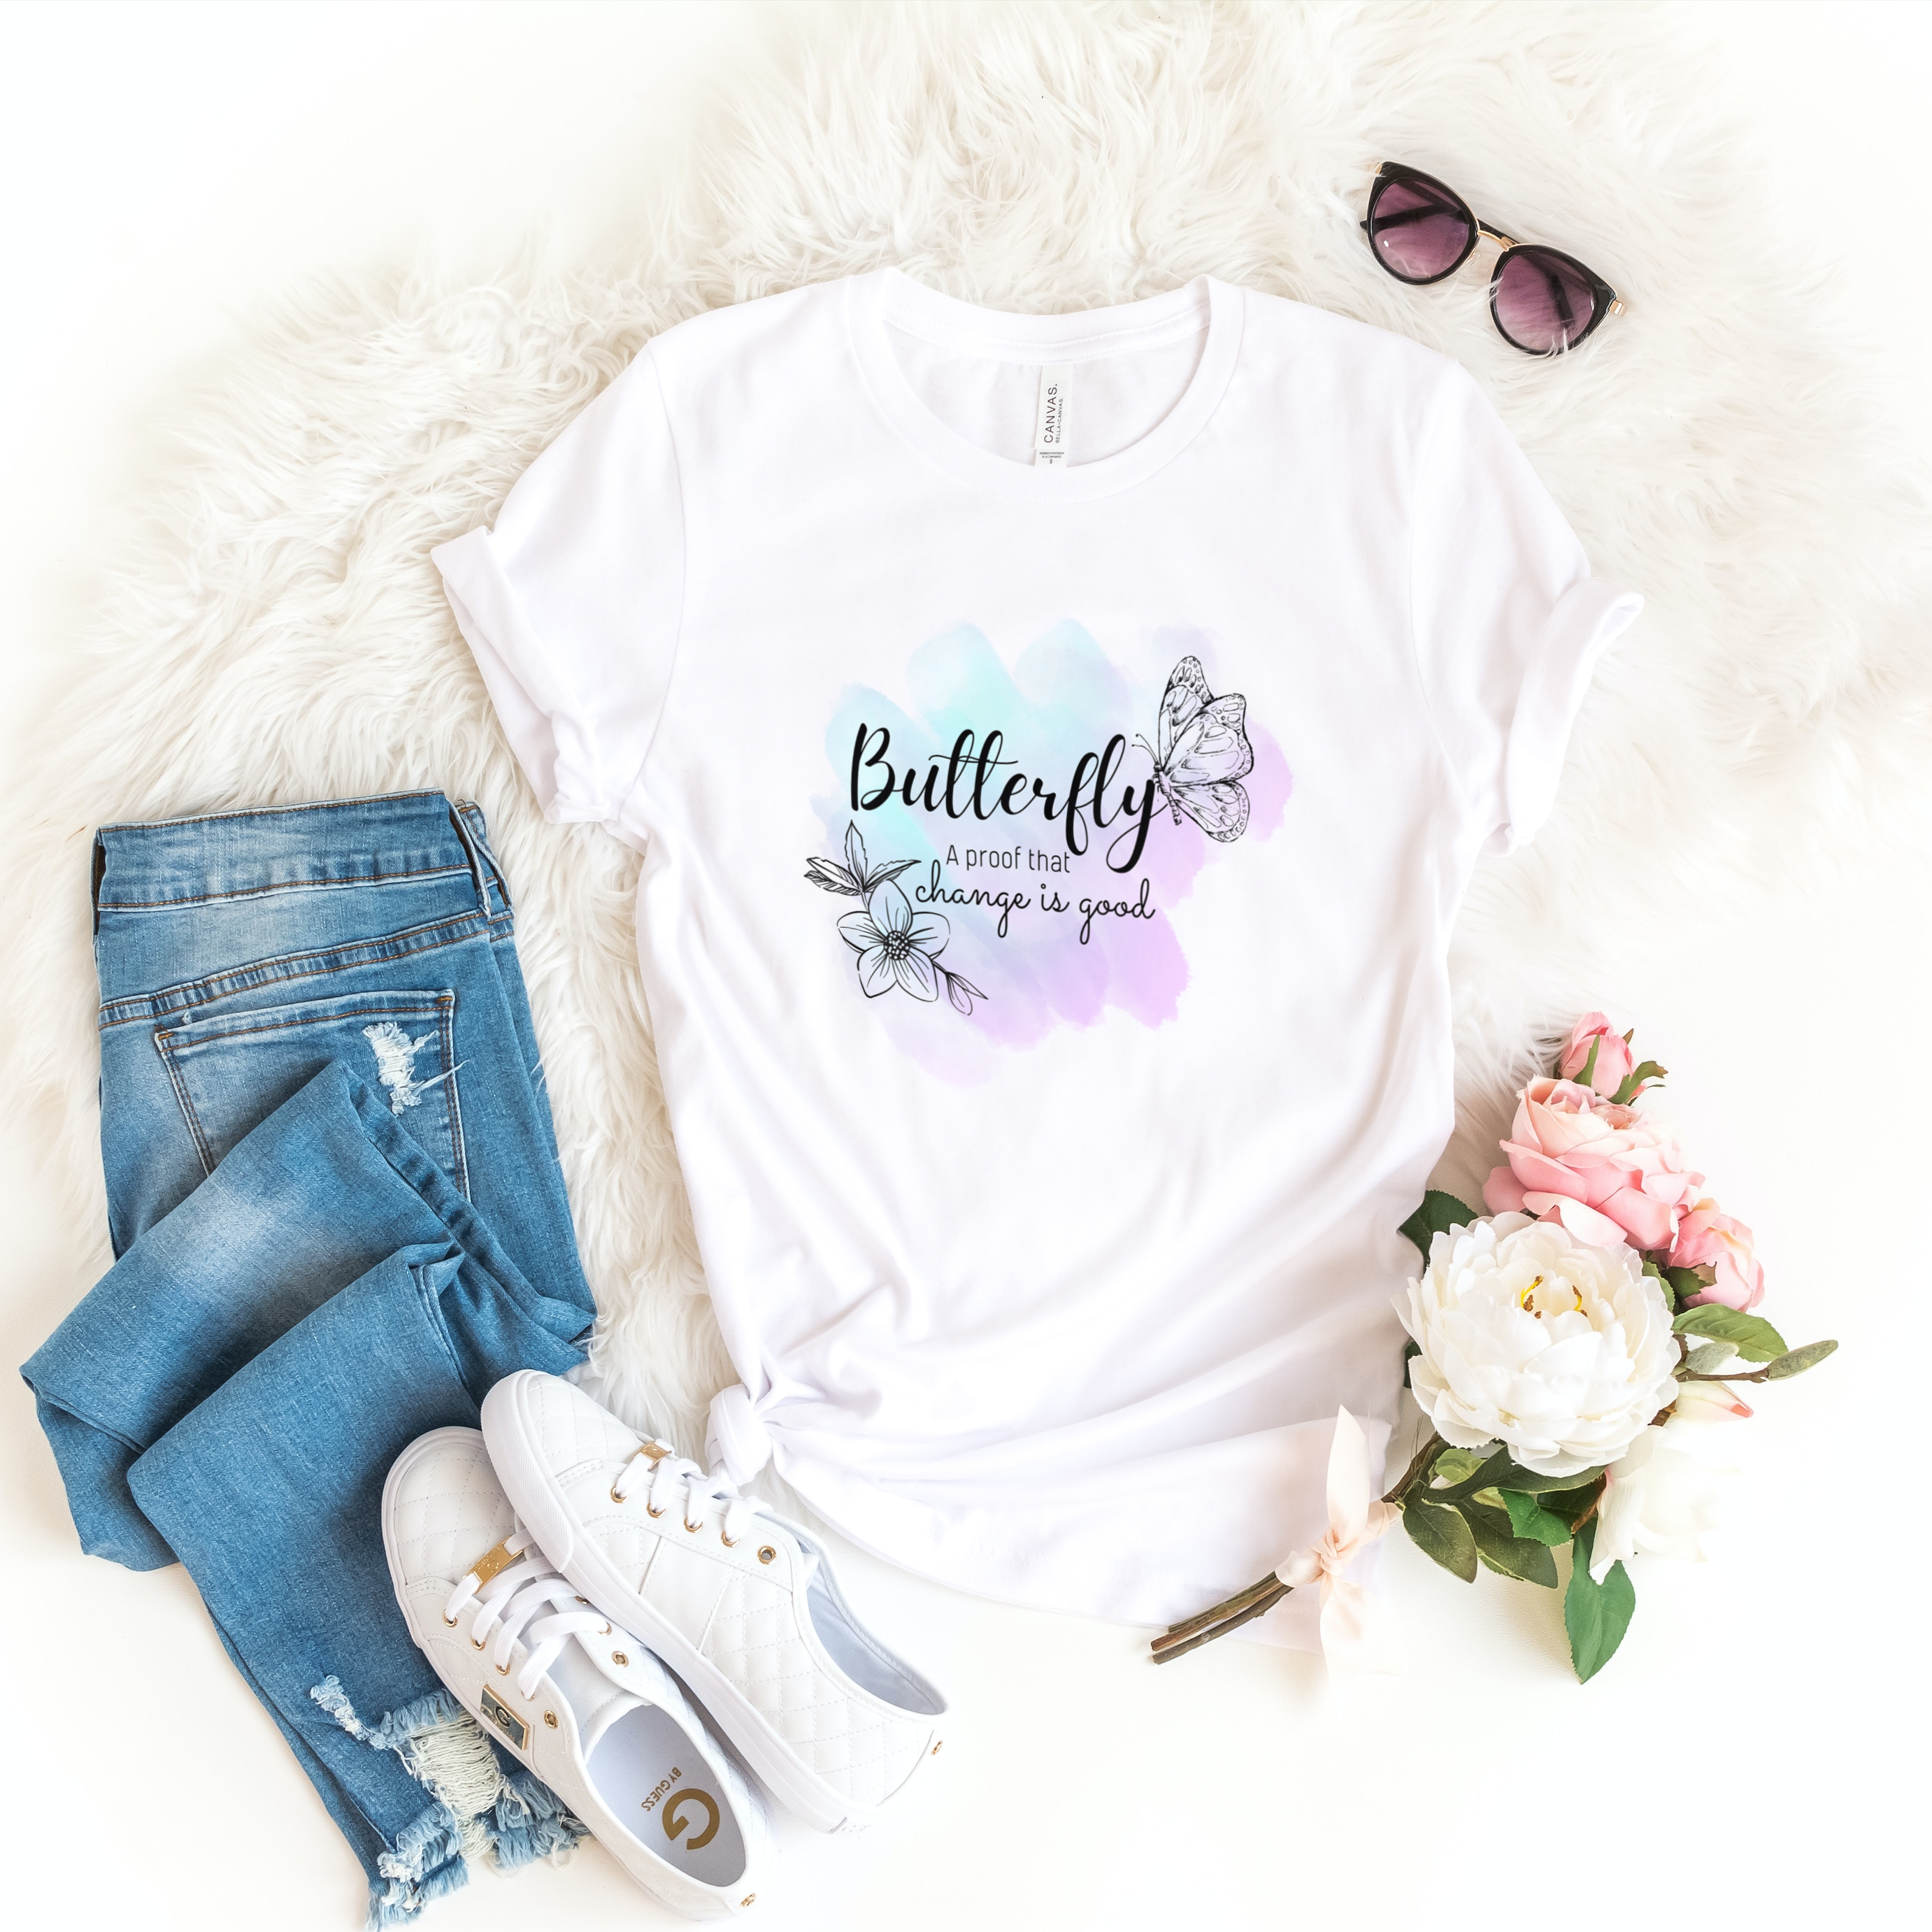 Story of Awakening Lifestyle Community Spirituality Relationships Love Light Meditation Oneness Earth Balance Healing Shop Store Charity Tree Nature Read Write T shirt Tops Tees Clothing Women Horoscope Organic Cotton  Butterfly Proof That Change Is Good Quote